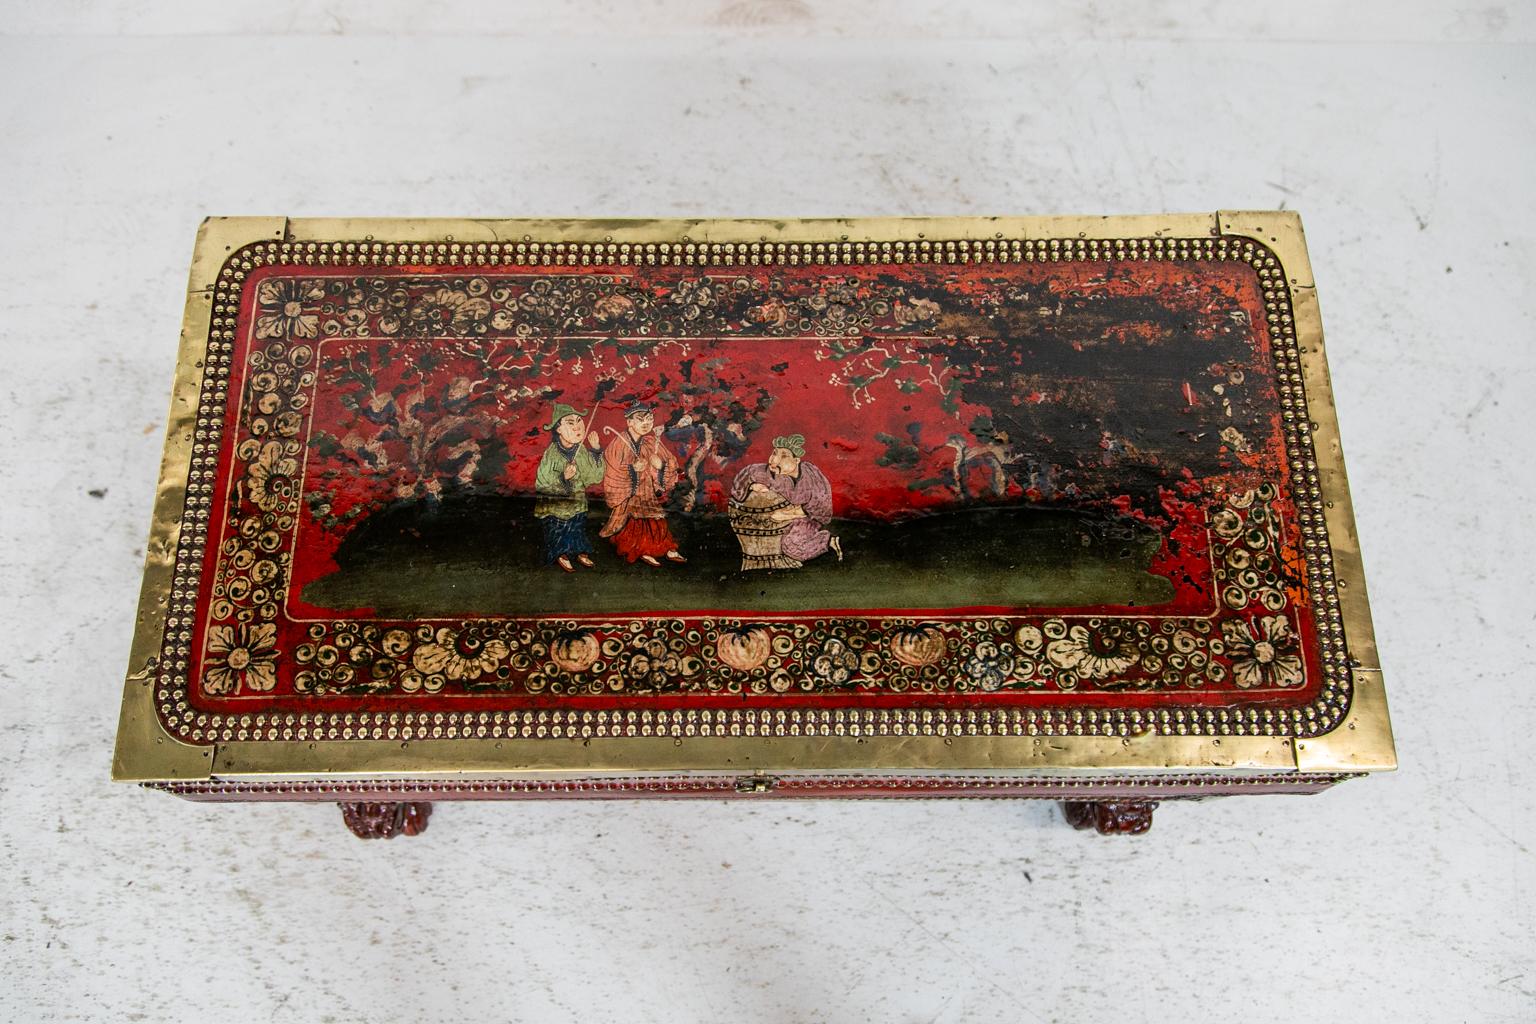 This Chinese chinoiserie trunk is bound with solid brass edging and has chinoiserie and floral painting on a red background. The chinoiserie decoration, painted on leather, is on the top, front, and sides. There Is noticeable wear to some of the